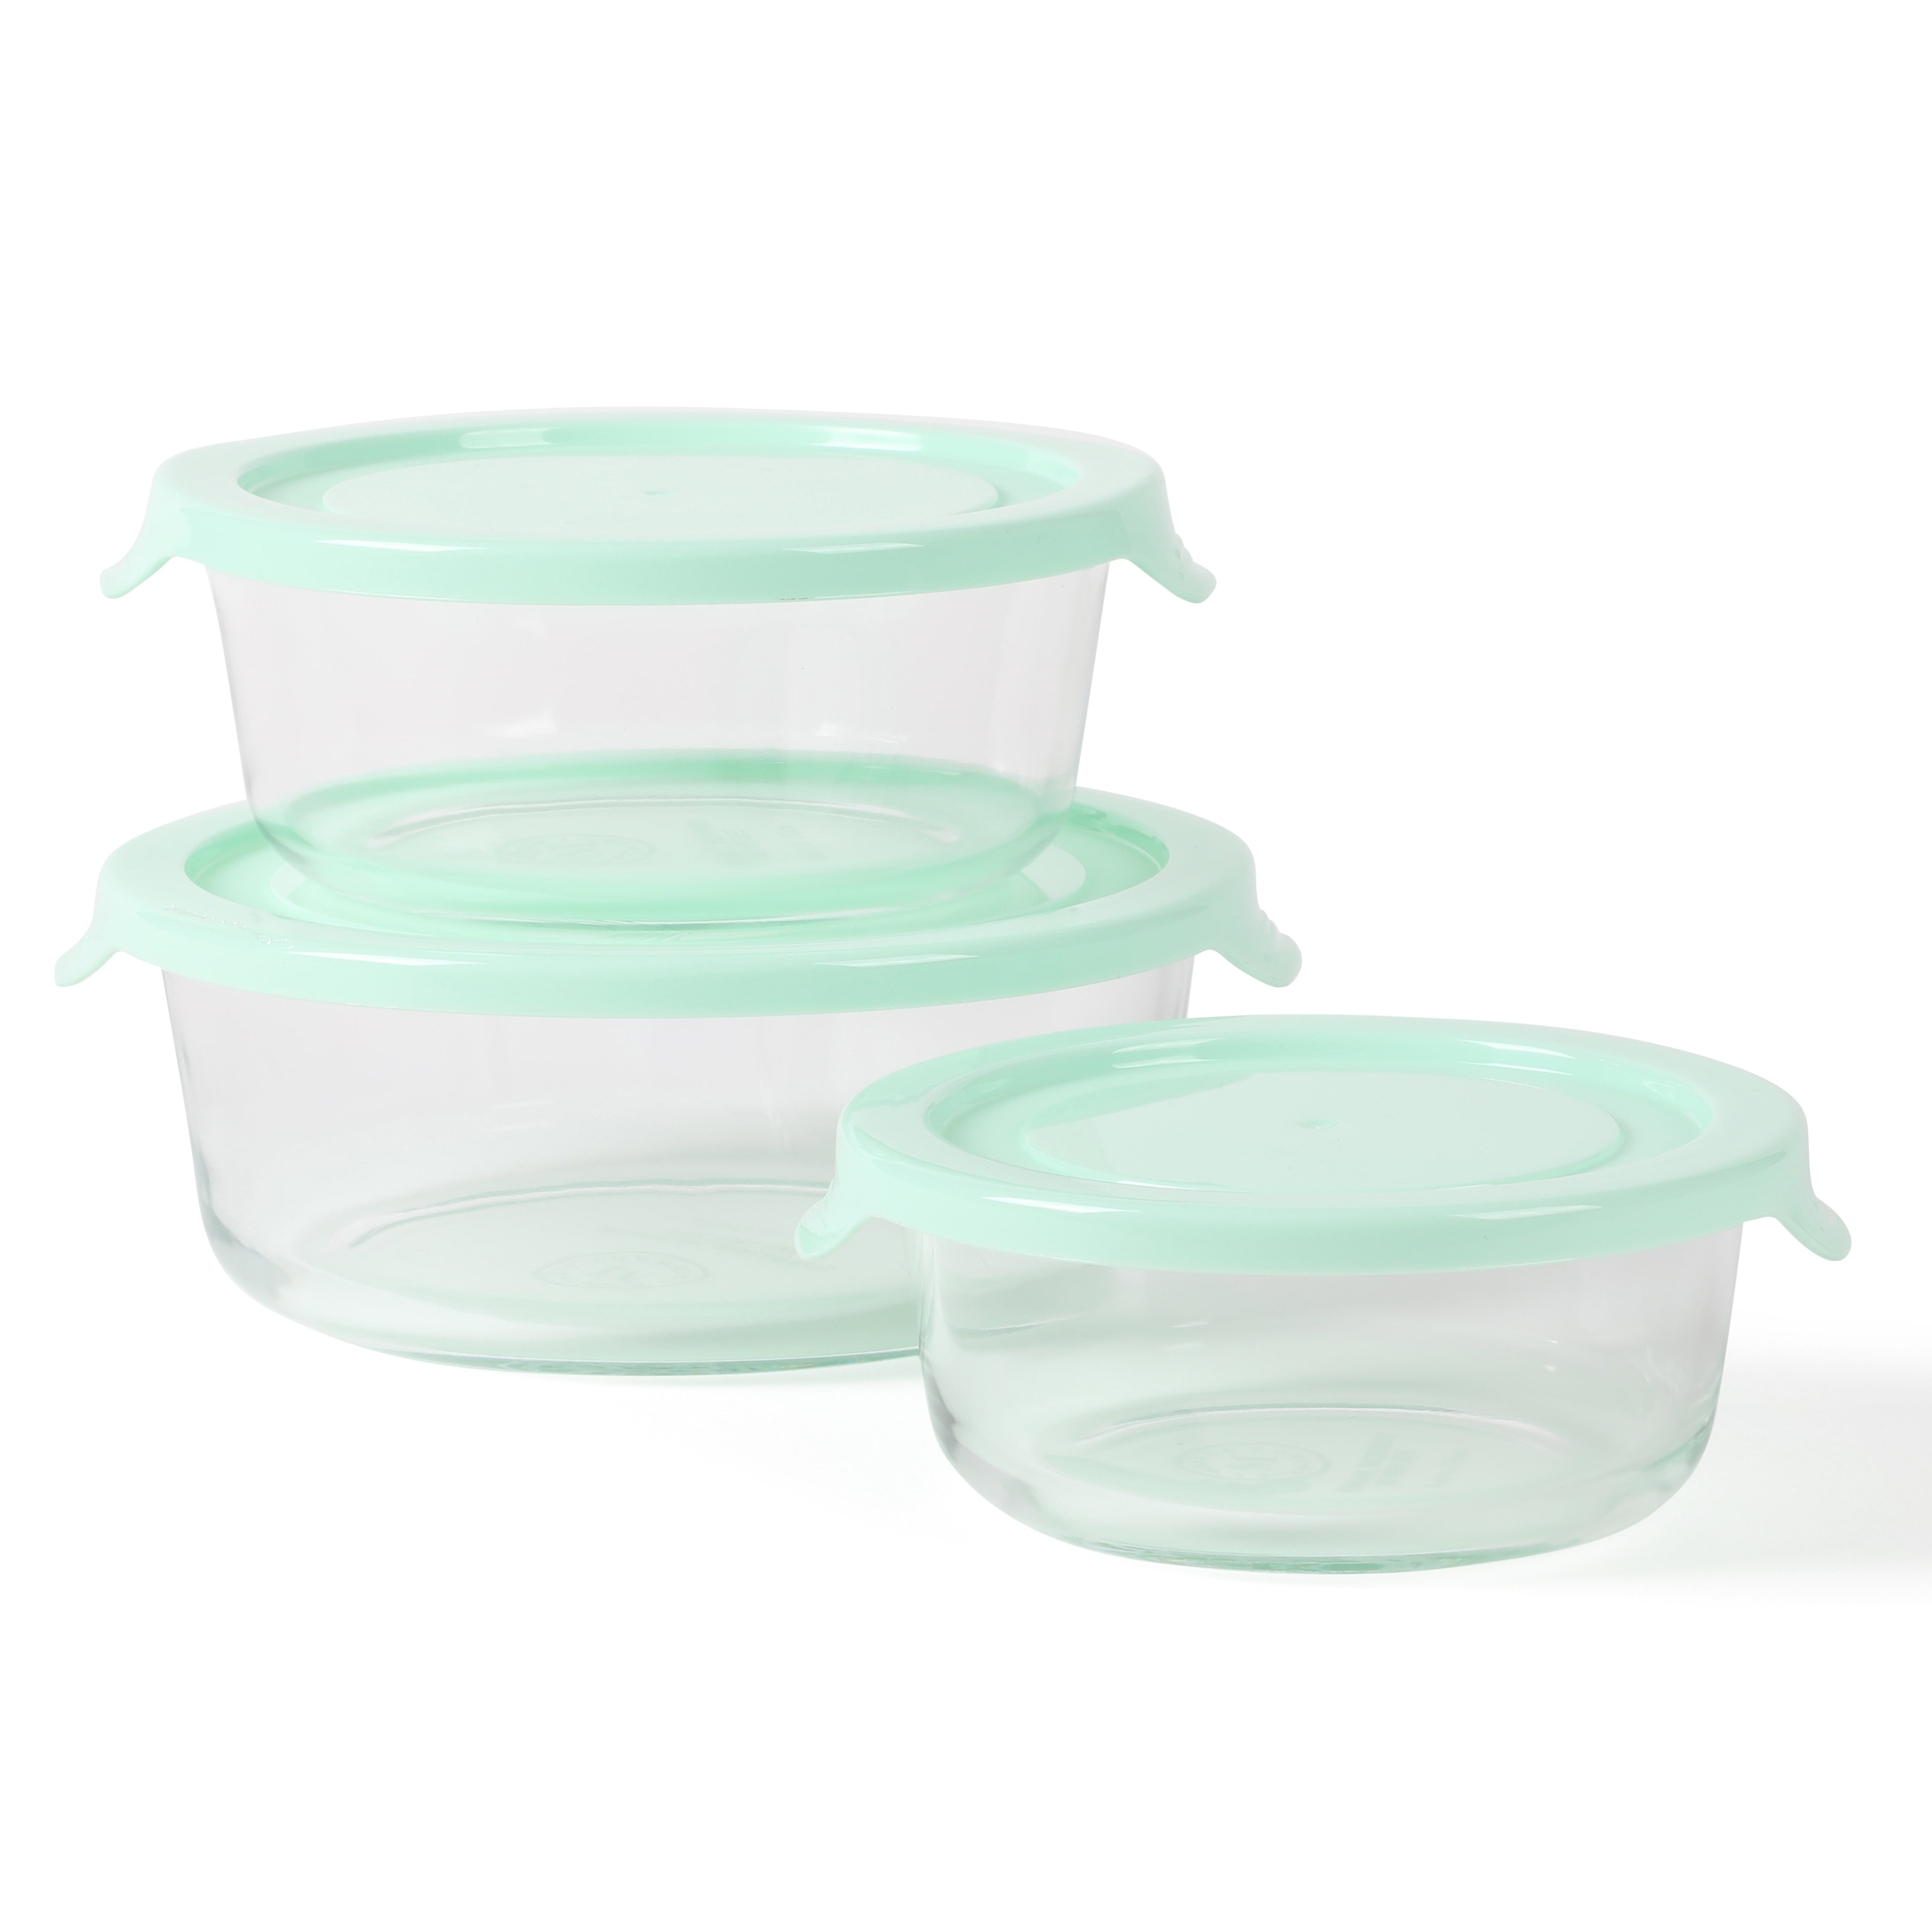 Tupperware Serving Center Set - 6 Compartment Serving Tray and Party  Platter - Food Storage Container and Lid - Dishwasher Safe & BPA Free